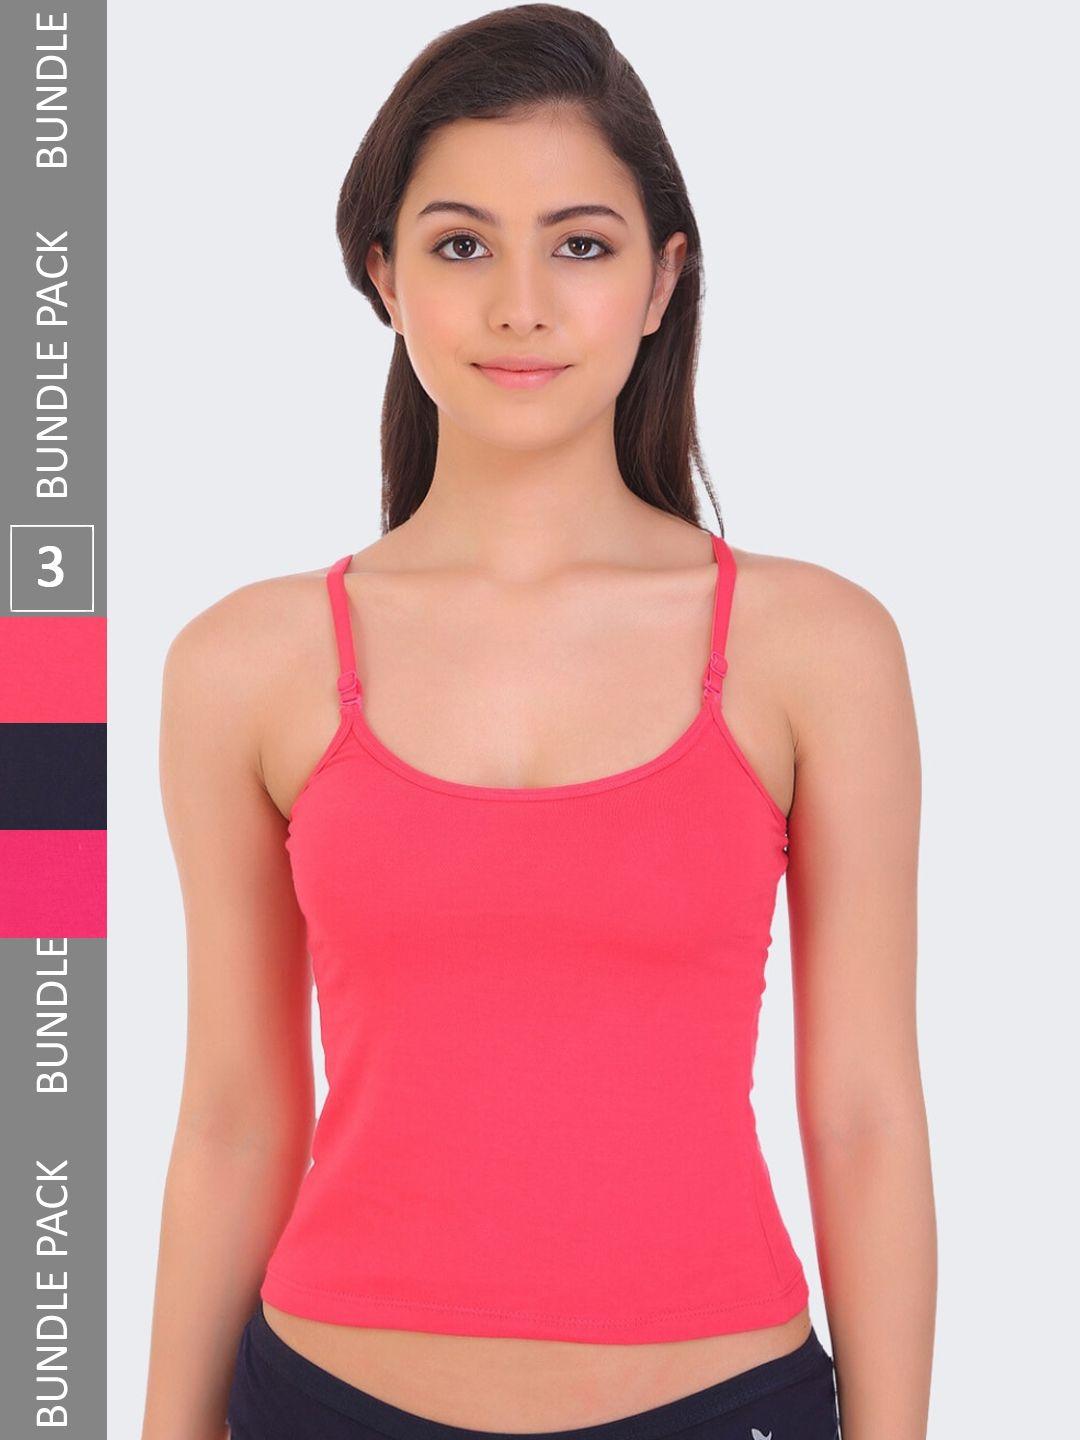 pooja ragenee pack of 3 cotton non-padded camisoles